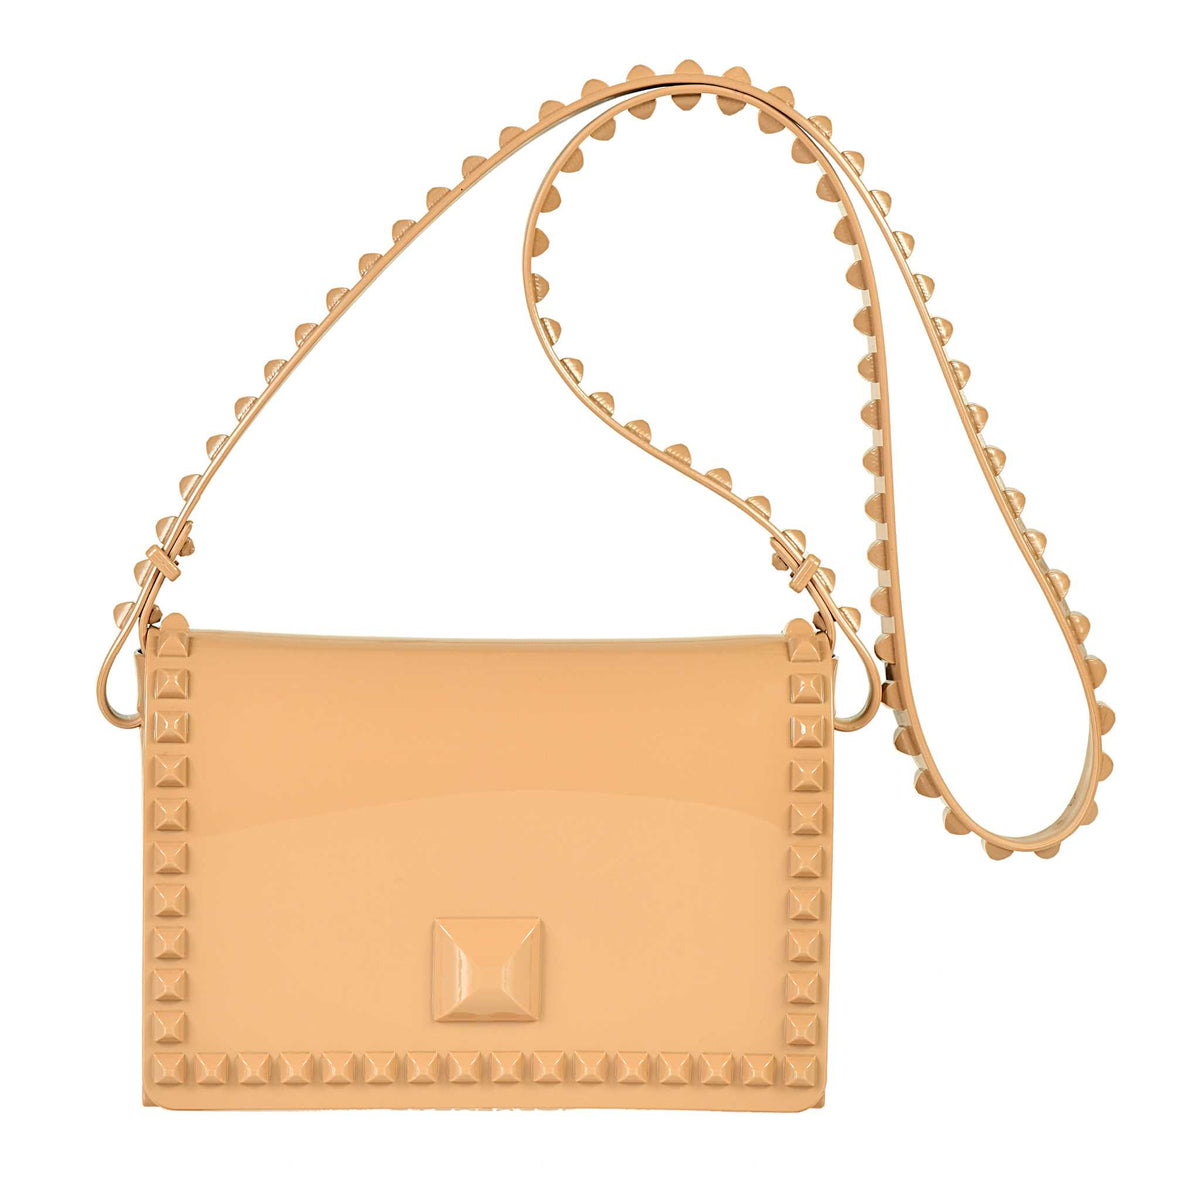 Flap jelly crossbody bag in color blush from Carmen Sol